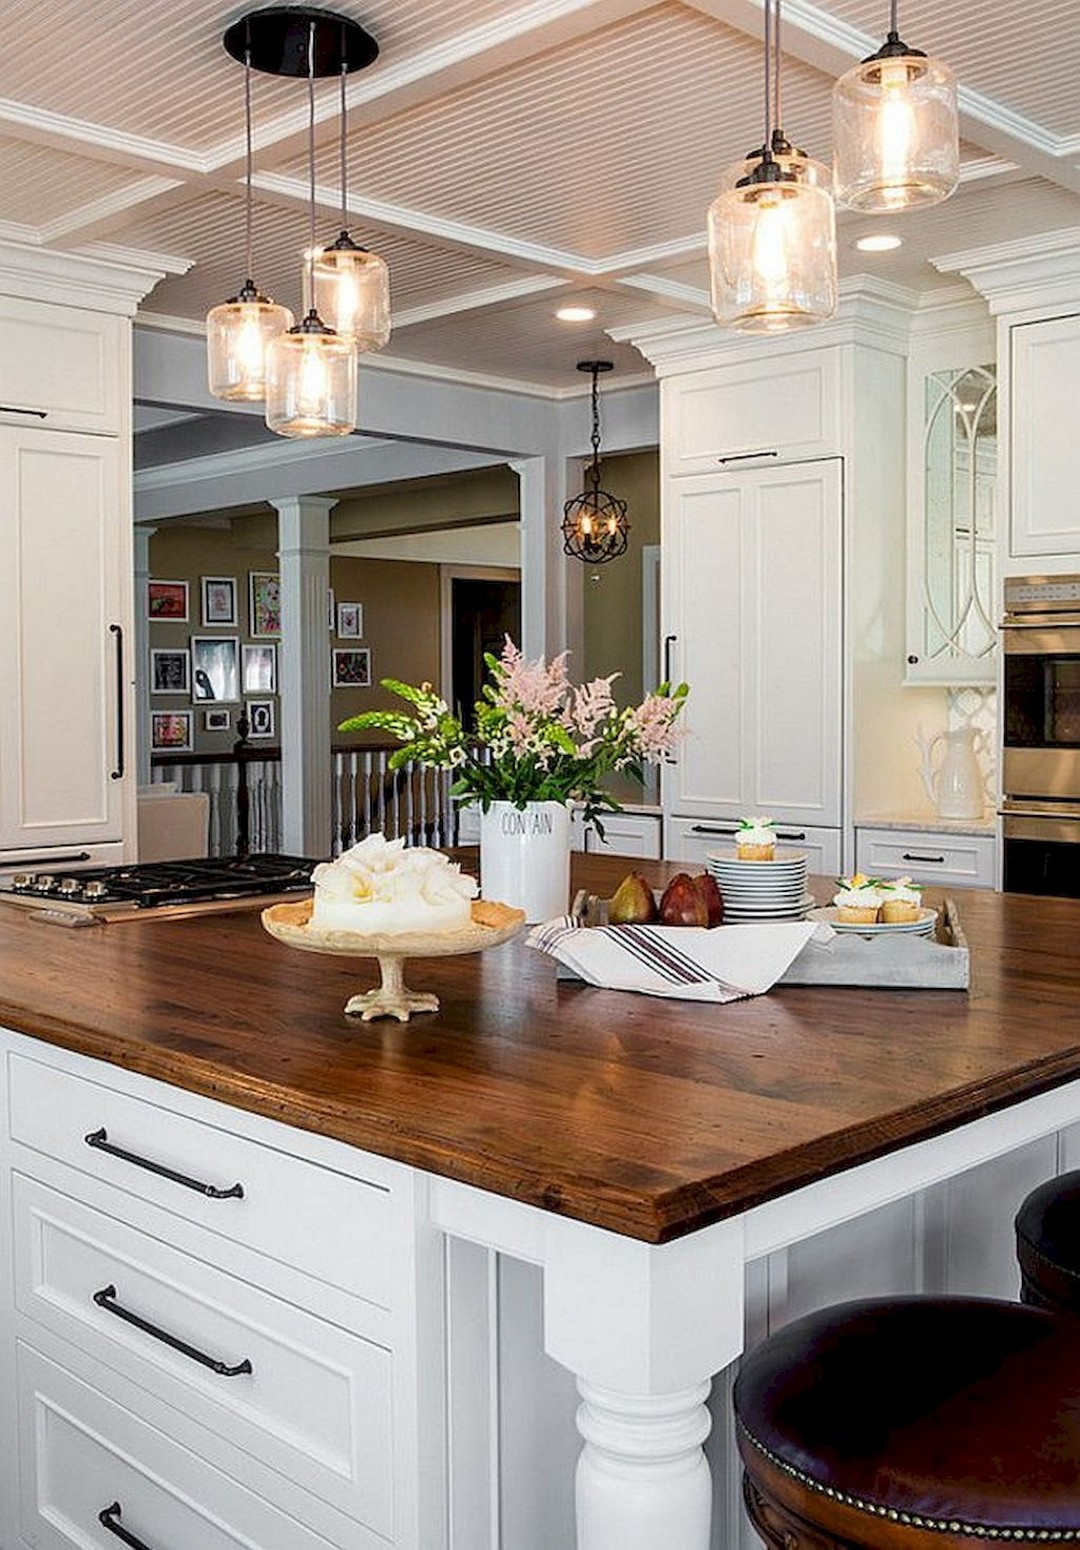 Farmhouse Kitchen Island Lighting
 Inspiring Farmhouse Style Lighting Designs to Copy in Your